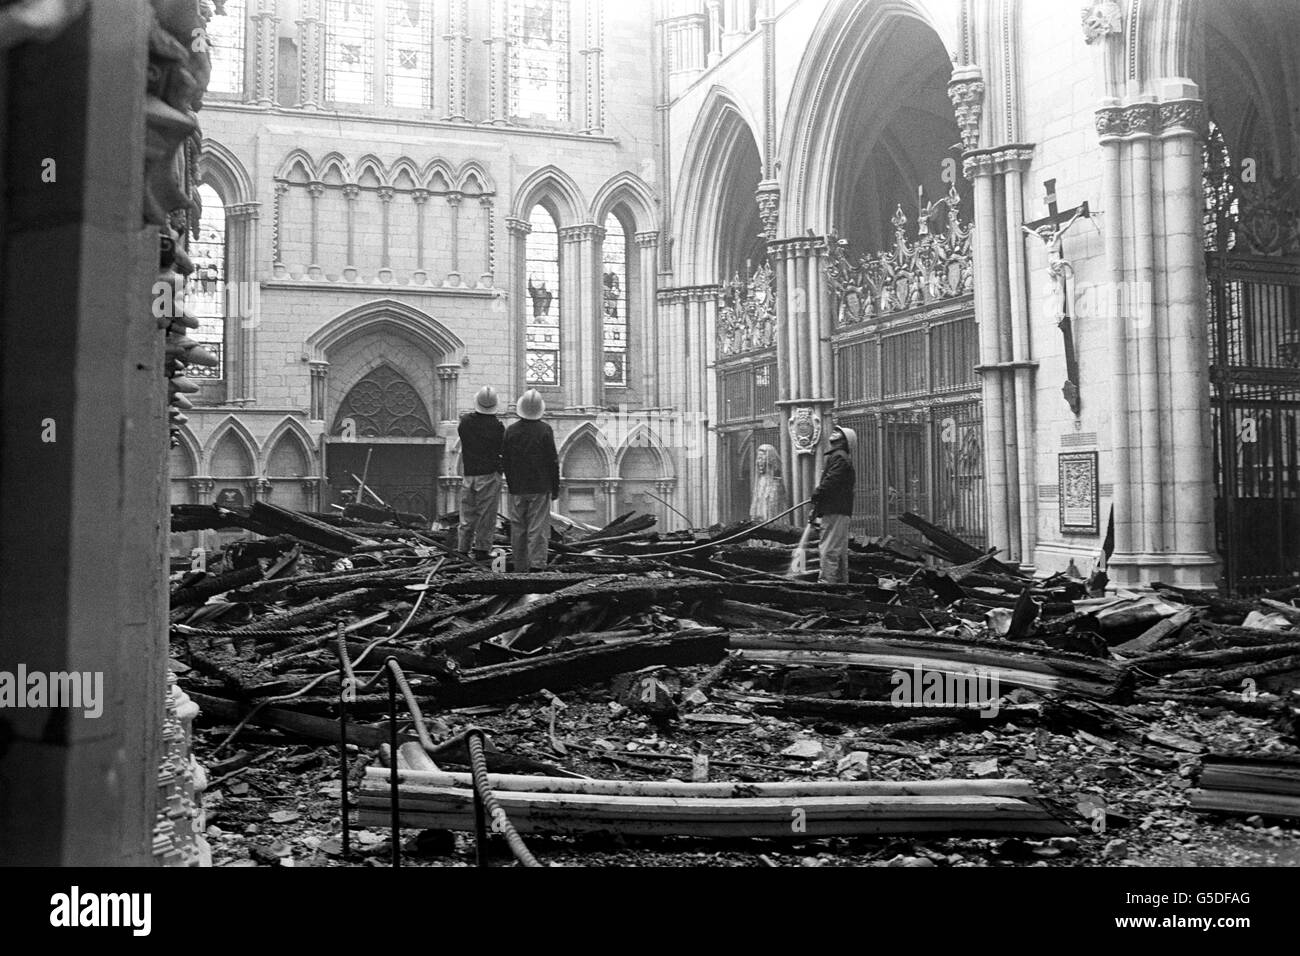 Firemen survey the fire damage to the South Transept of York Minster. The South Transept was seriously damaged, but after fighting the blaze for more than three hours firemen saved the rest of the cathedral, including the central tower. *9TH JULY : On this day in 1984 the 13th Century South Transept of York Minster was destroyed by fire. Stock Photo